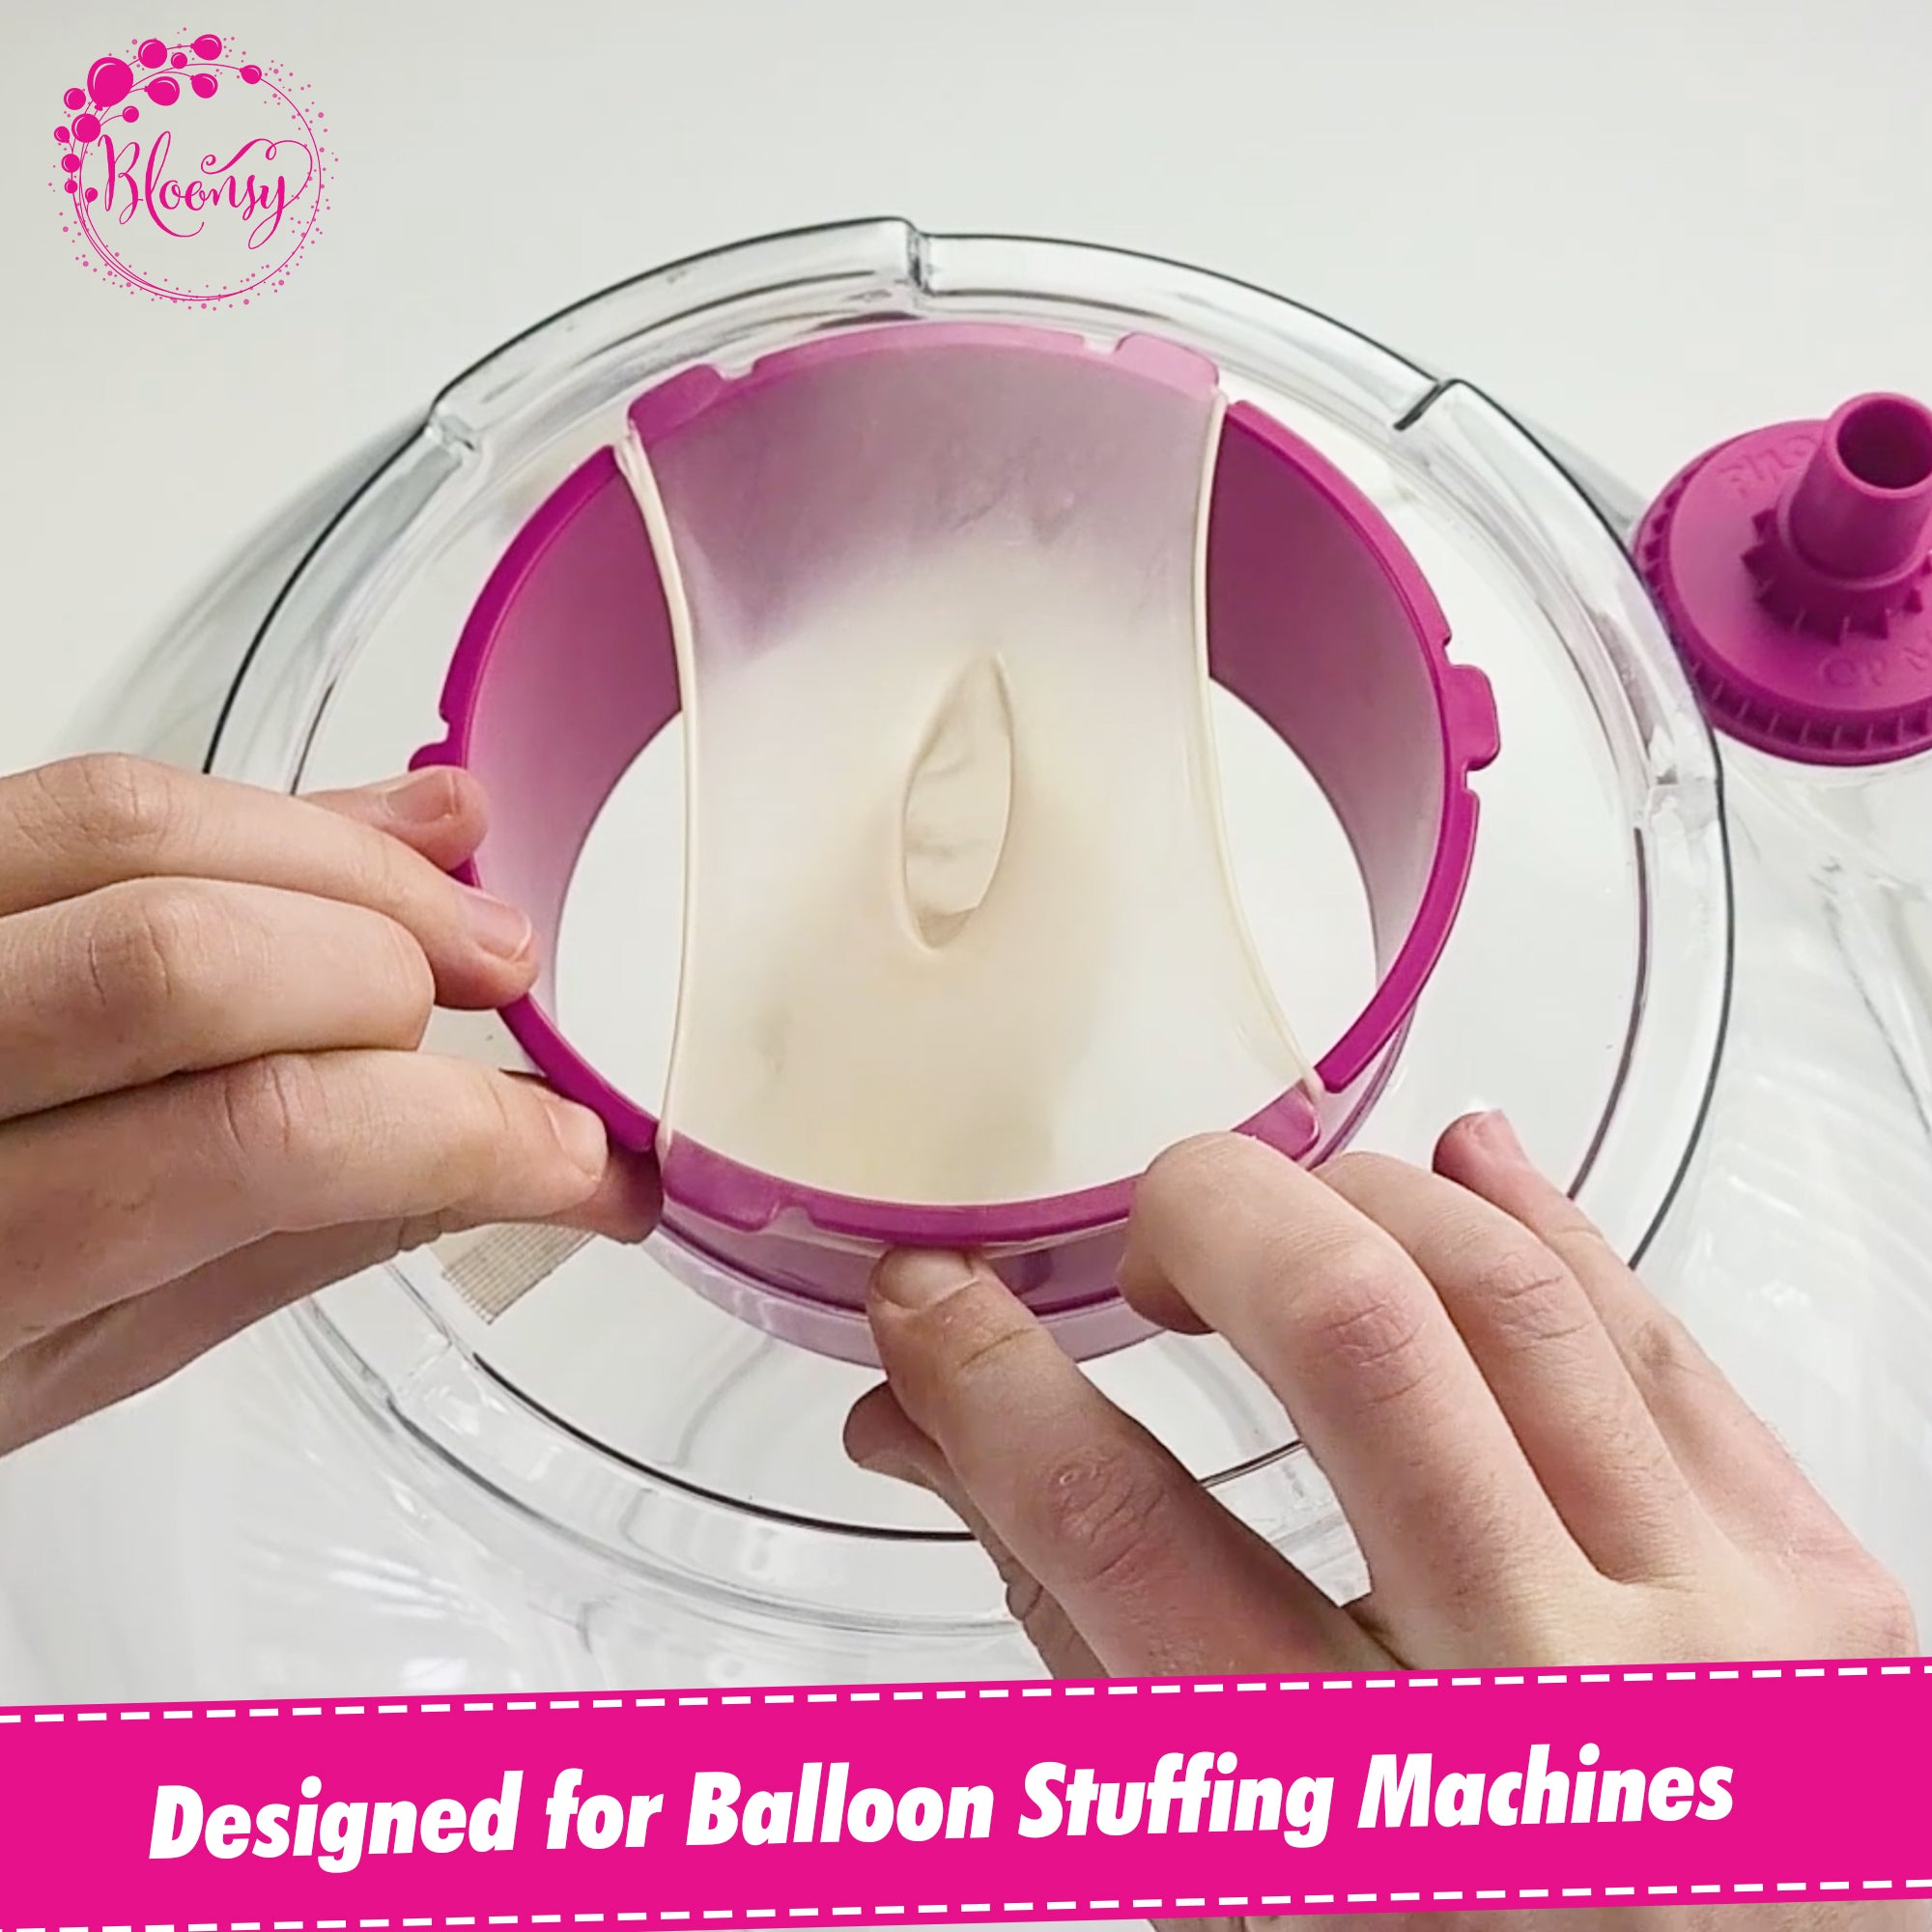 How to use Bloonsy Balloon Stuffing Machine? - Clear bobo balloons 